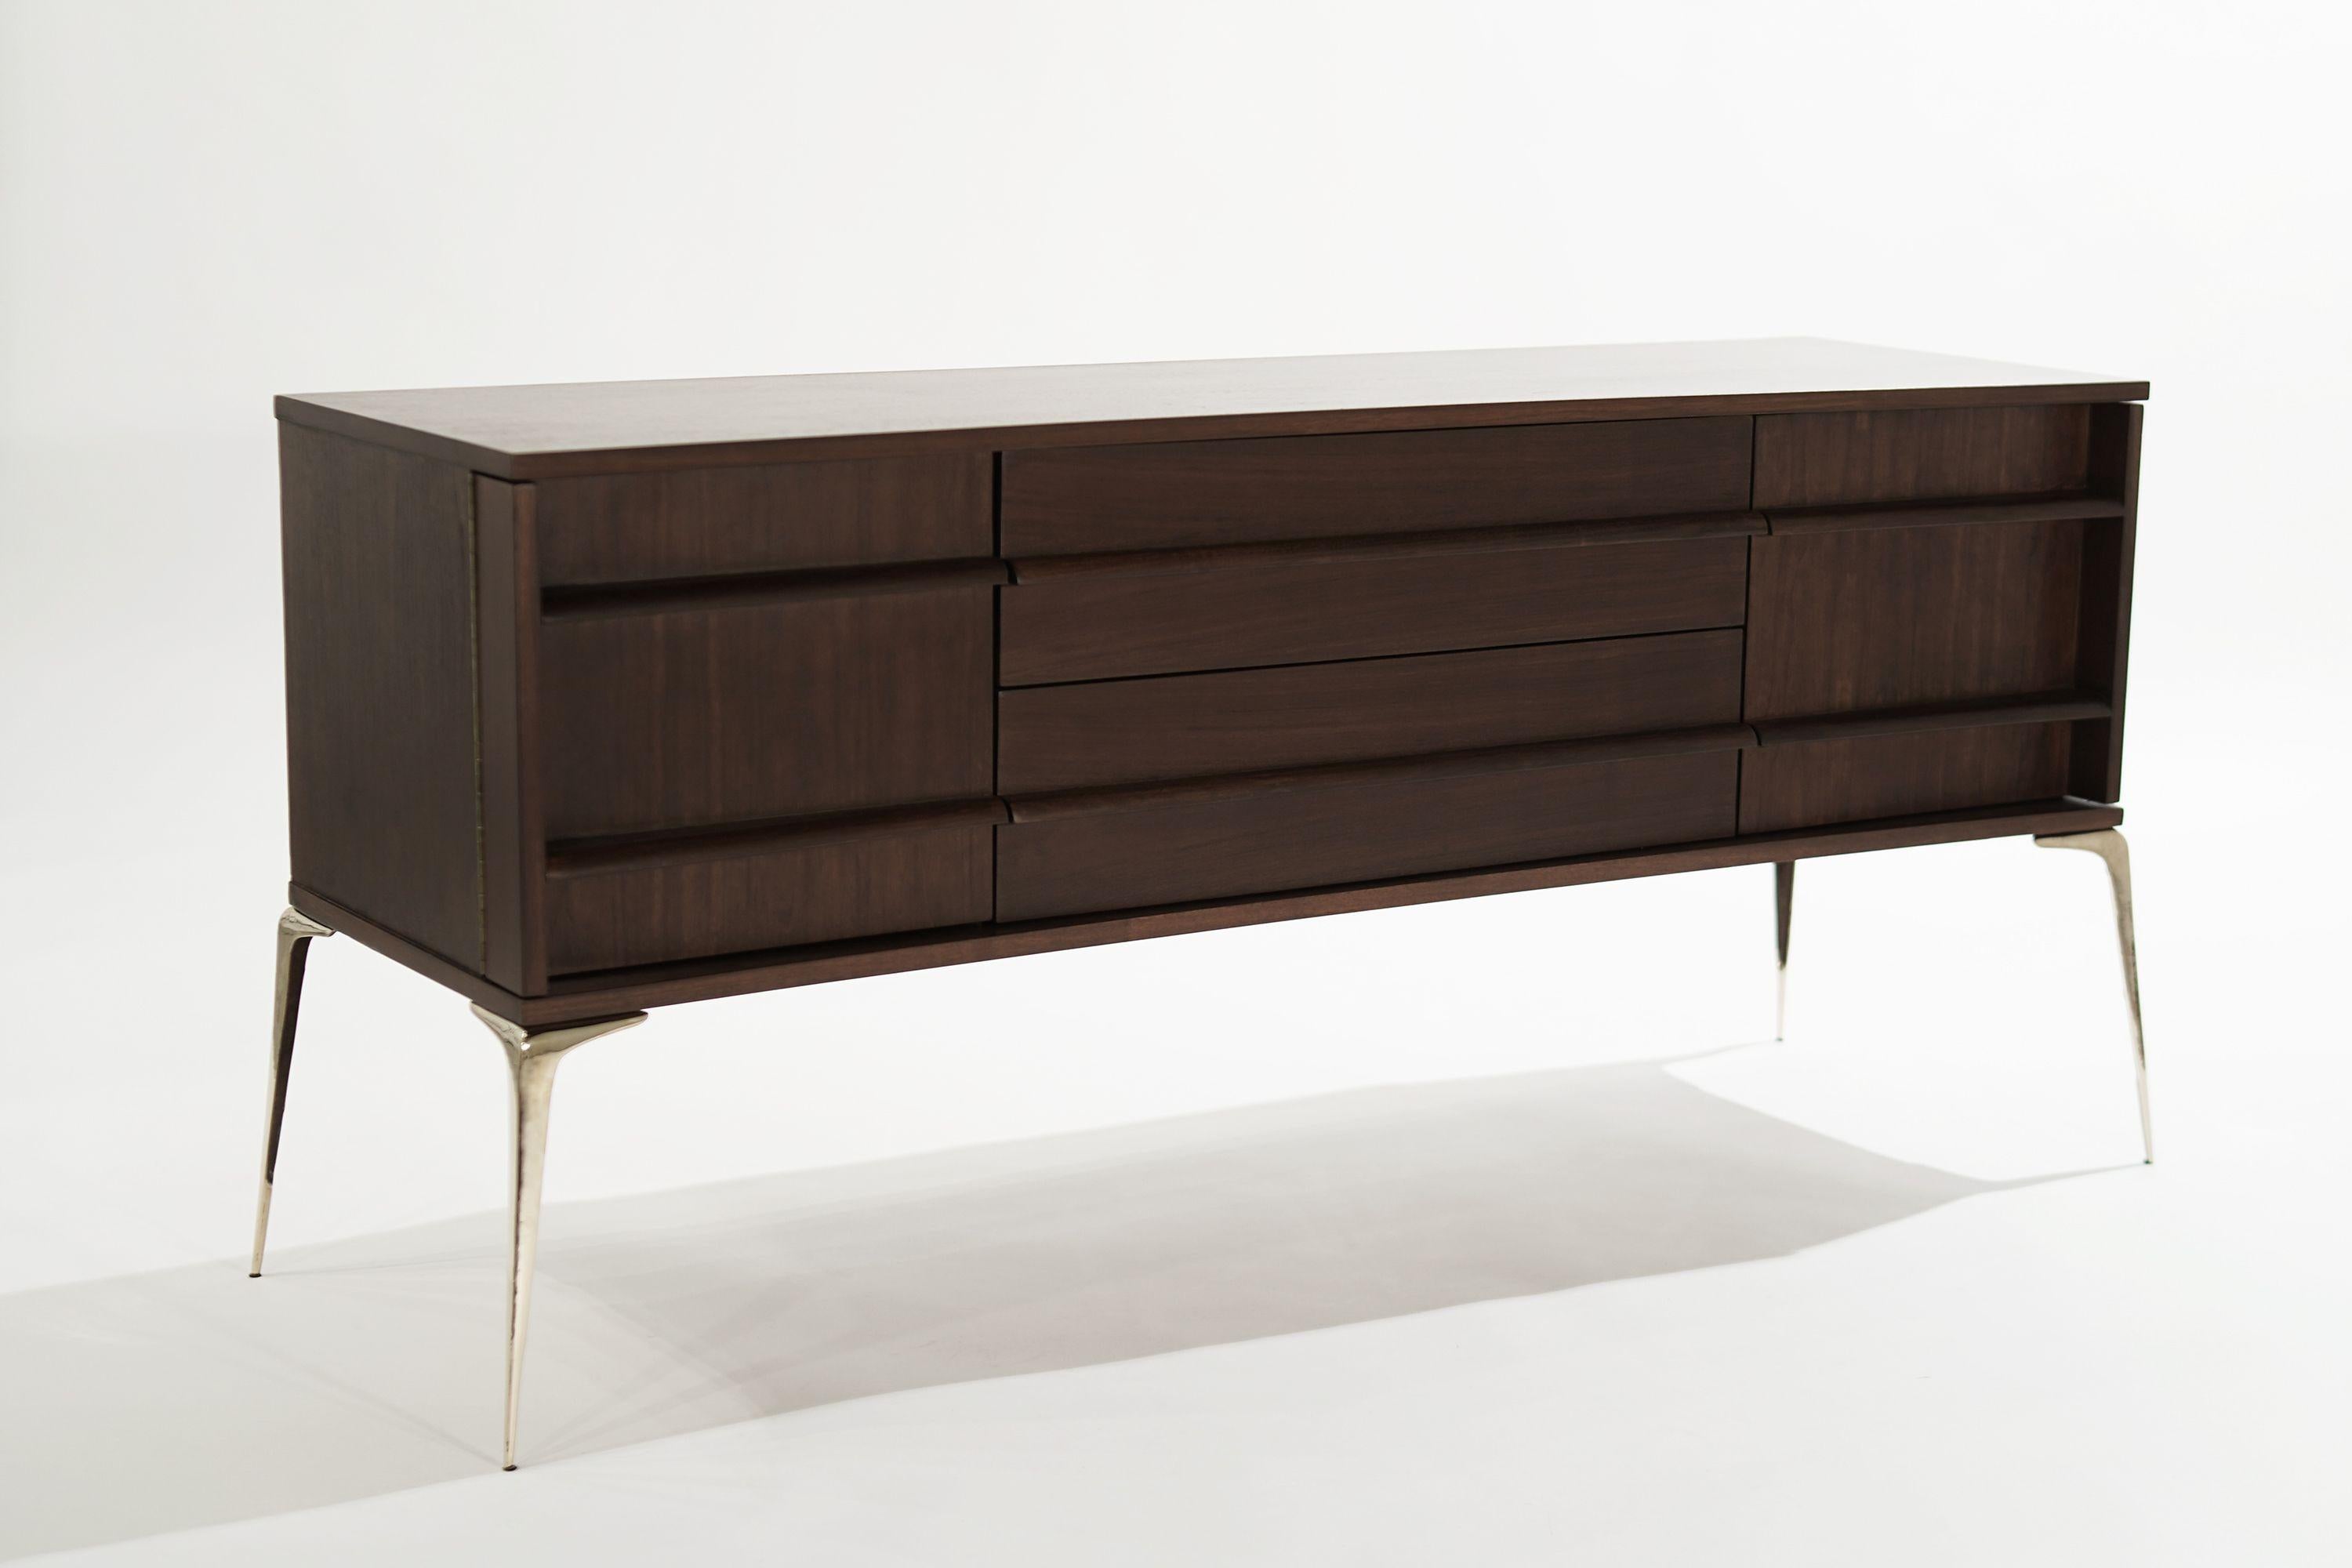 A Mid-Century Modern credenza executed in walnut, featuring brass 